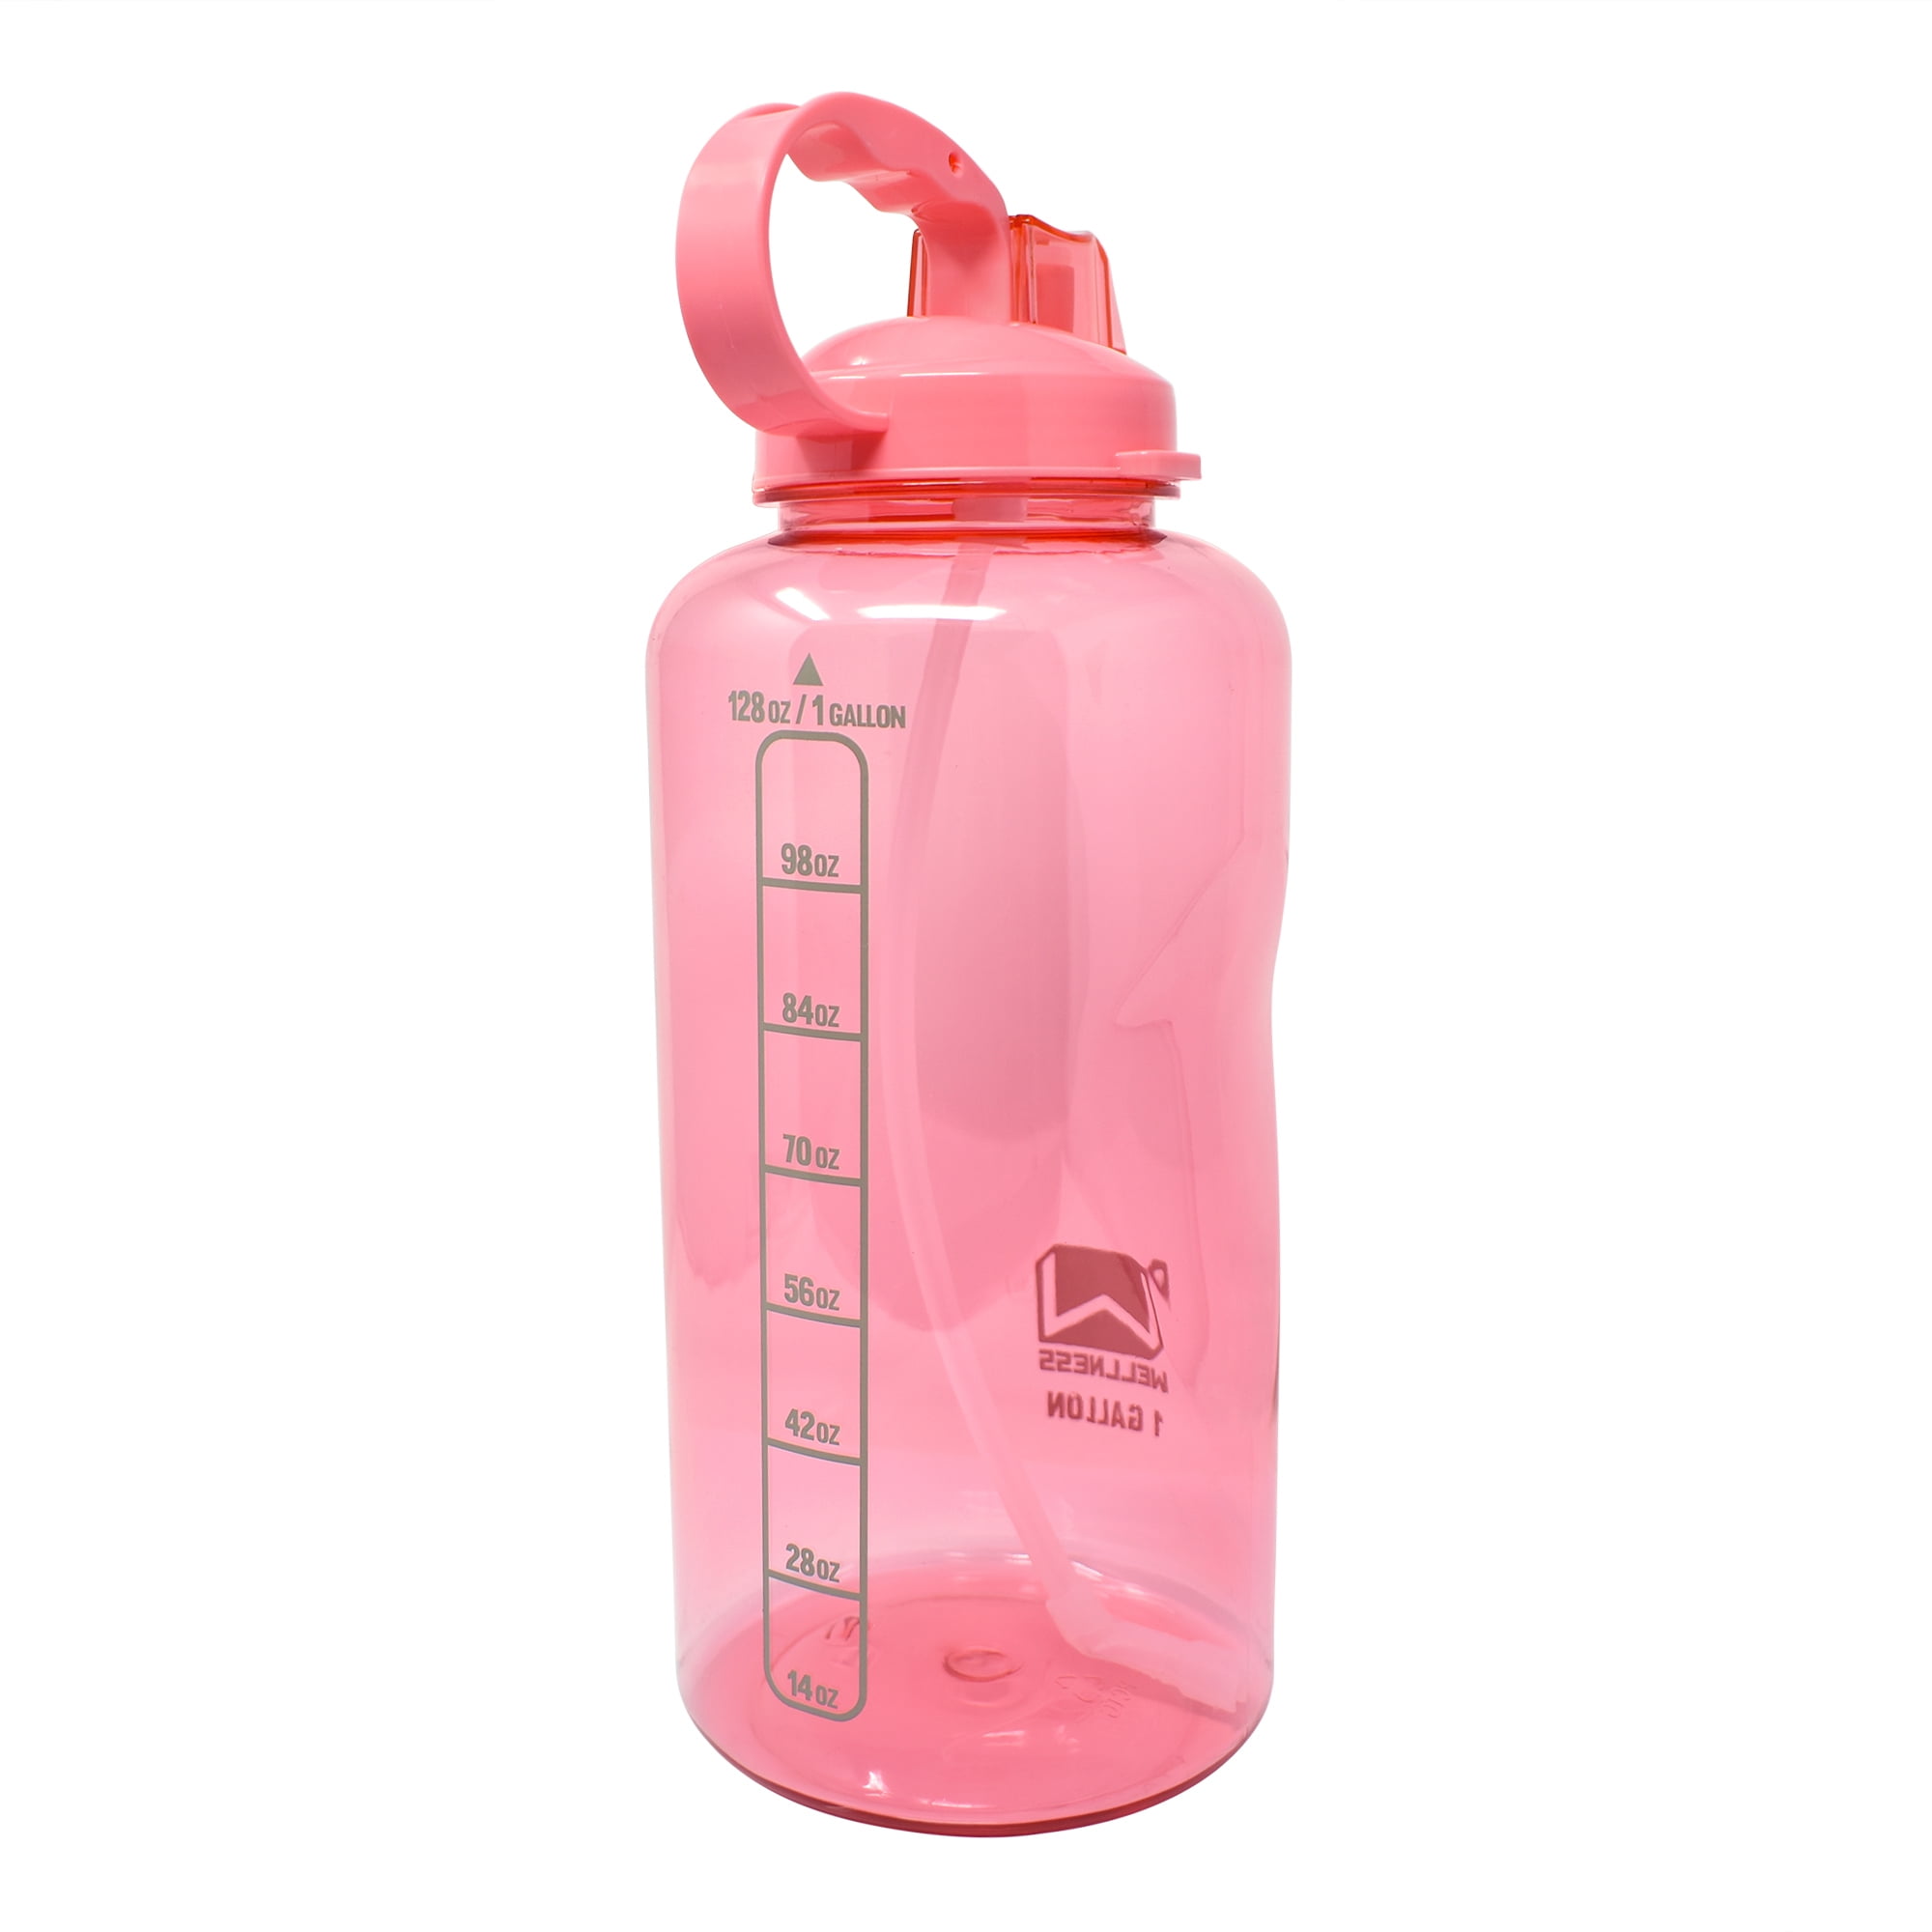 DEDEYA 8oz/230ml Silicone Coated Small Glass Water Bottle with White  Cap,Pretty and Cute(Pink Bottle)